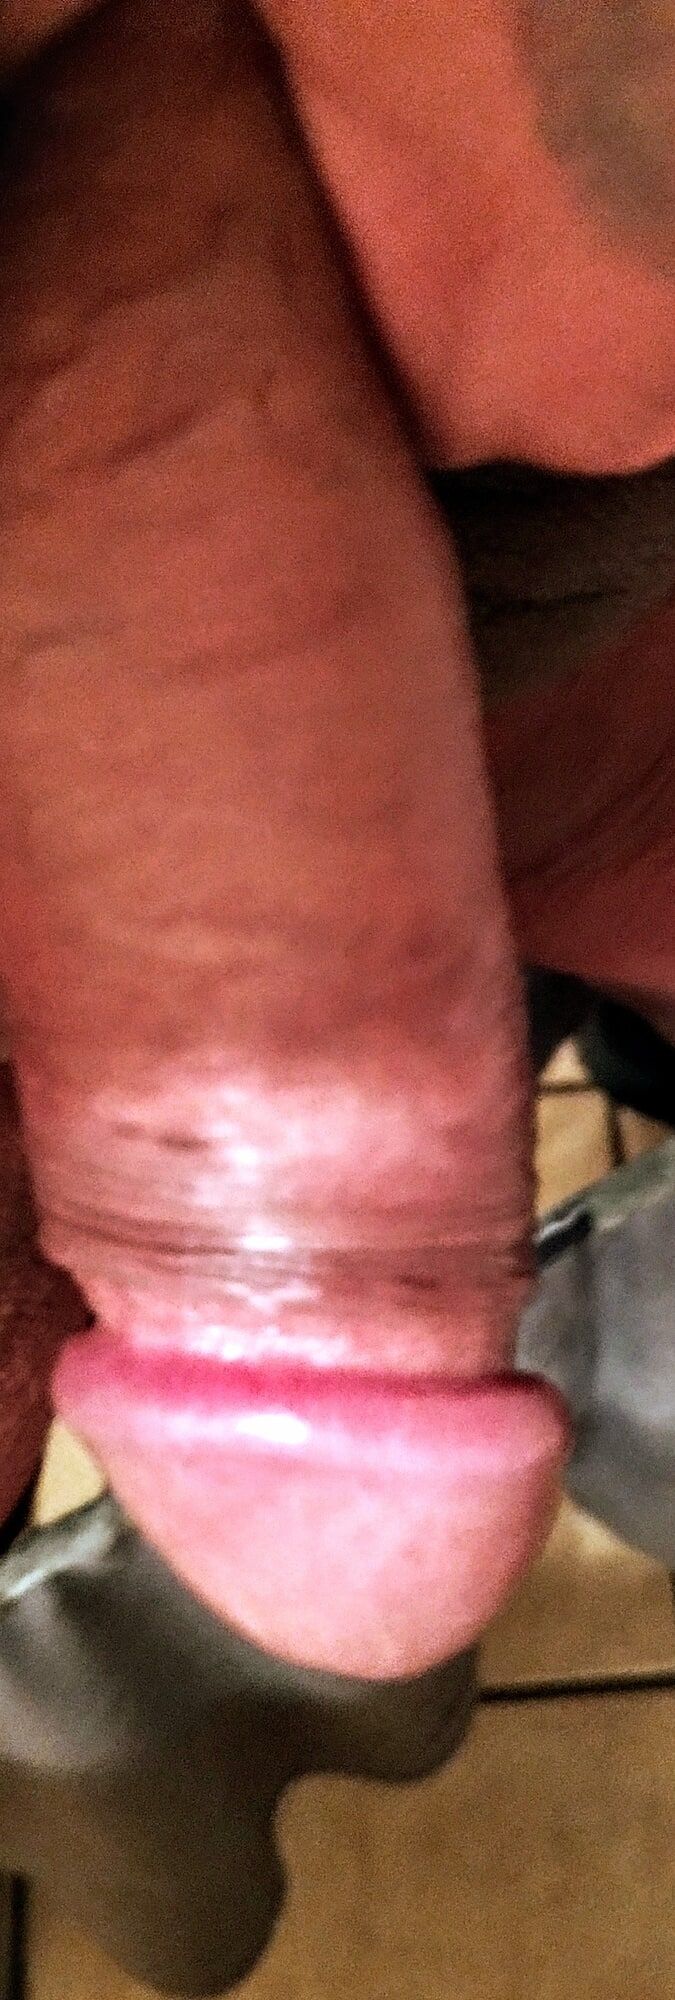 My fat cock is so hard 